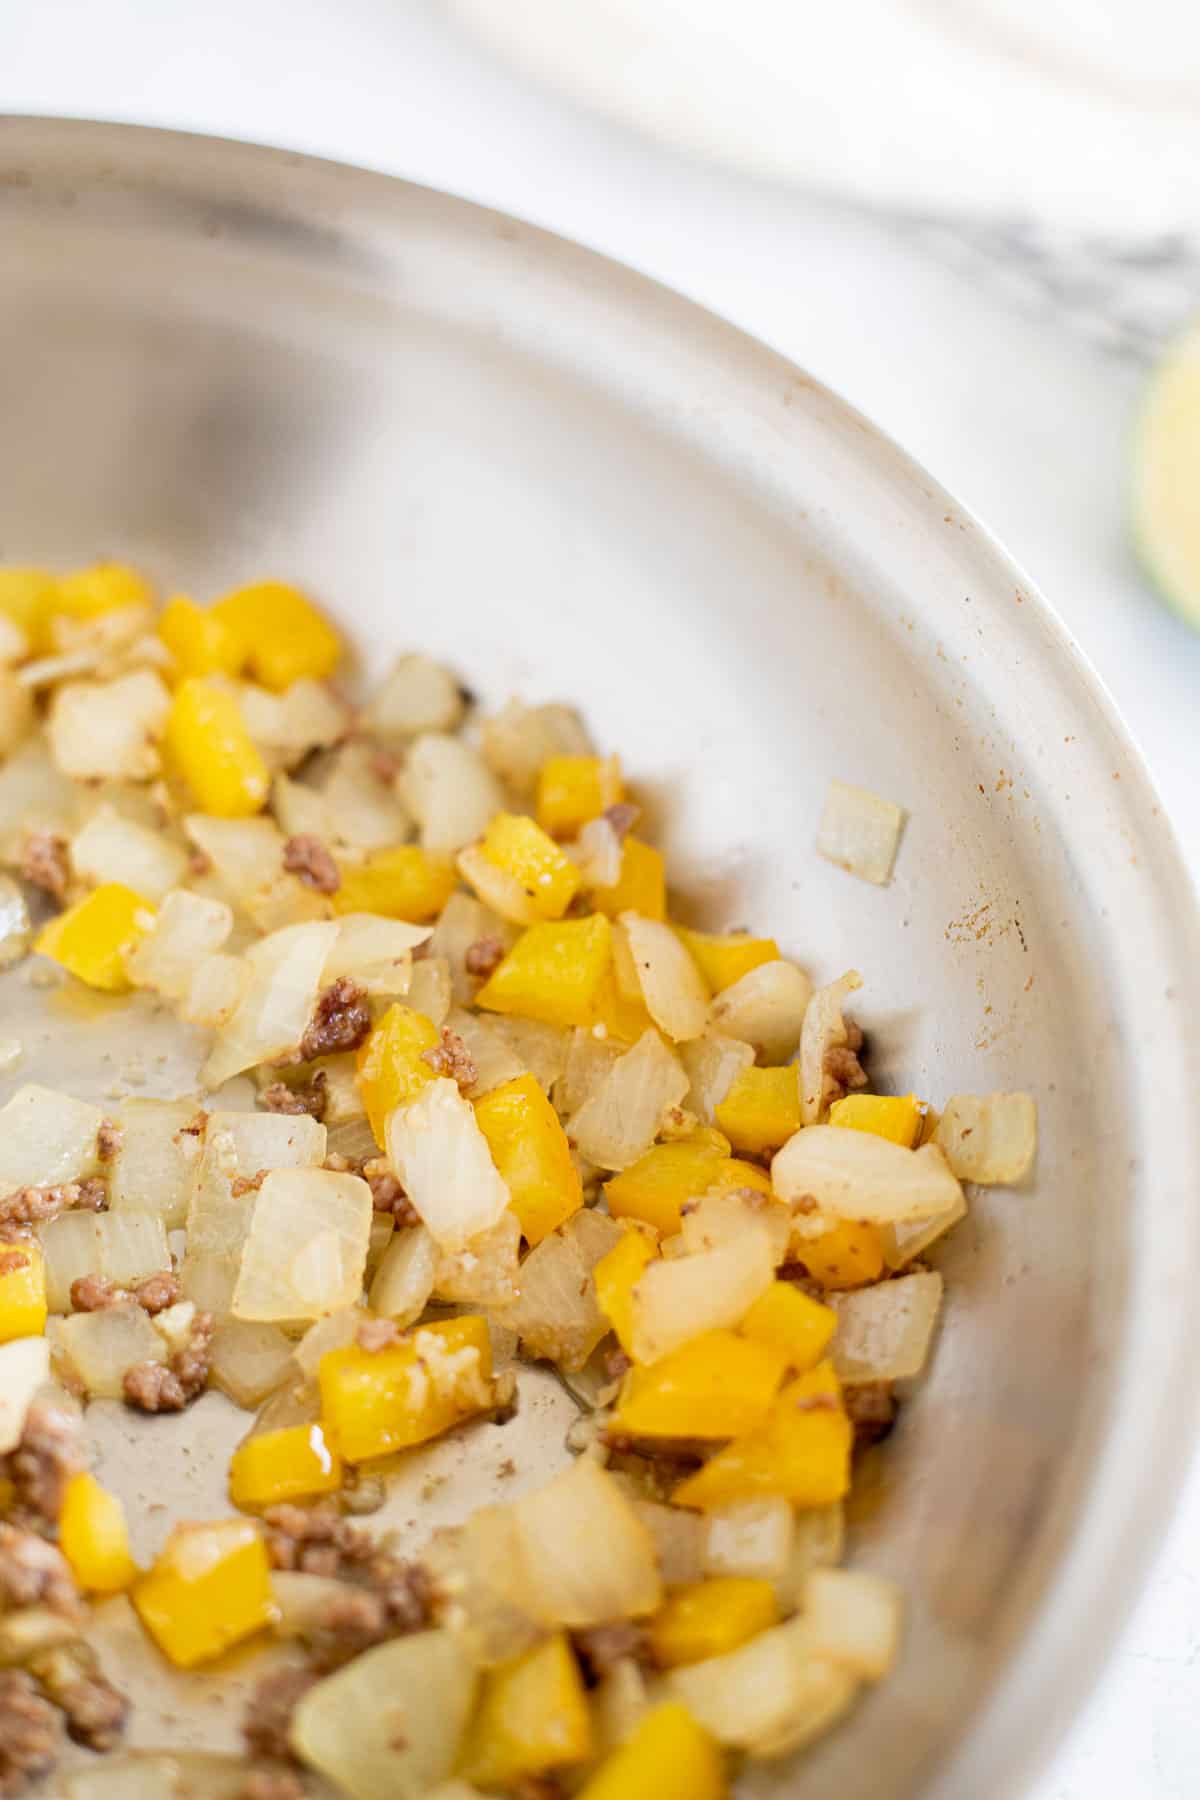 diced onion and yellow pepper cooked in a stainless steel pan.